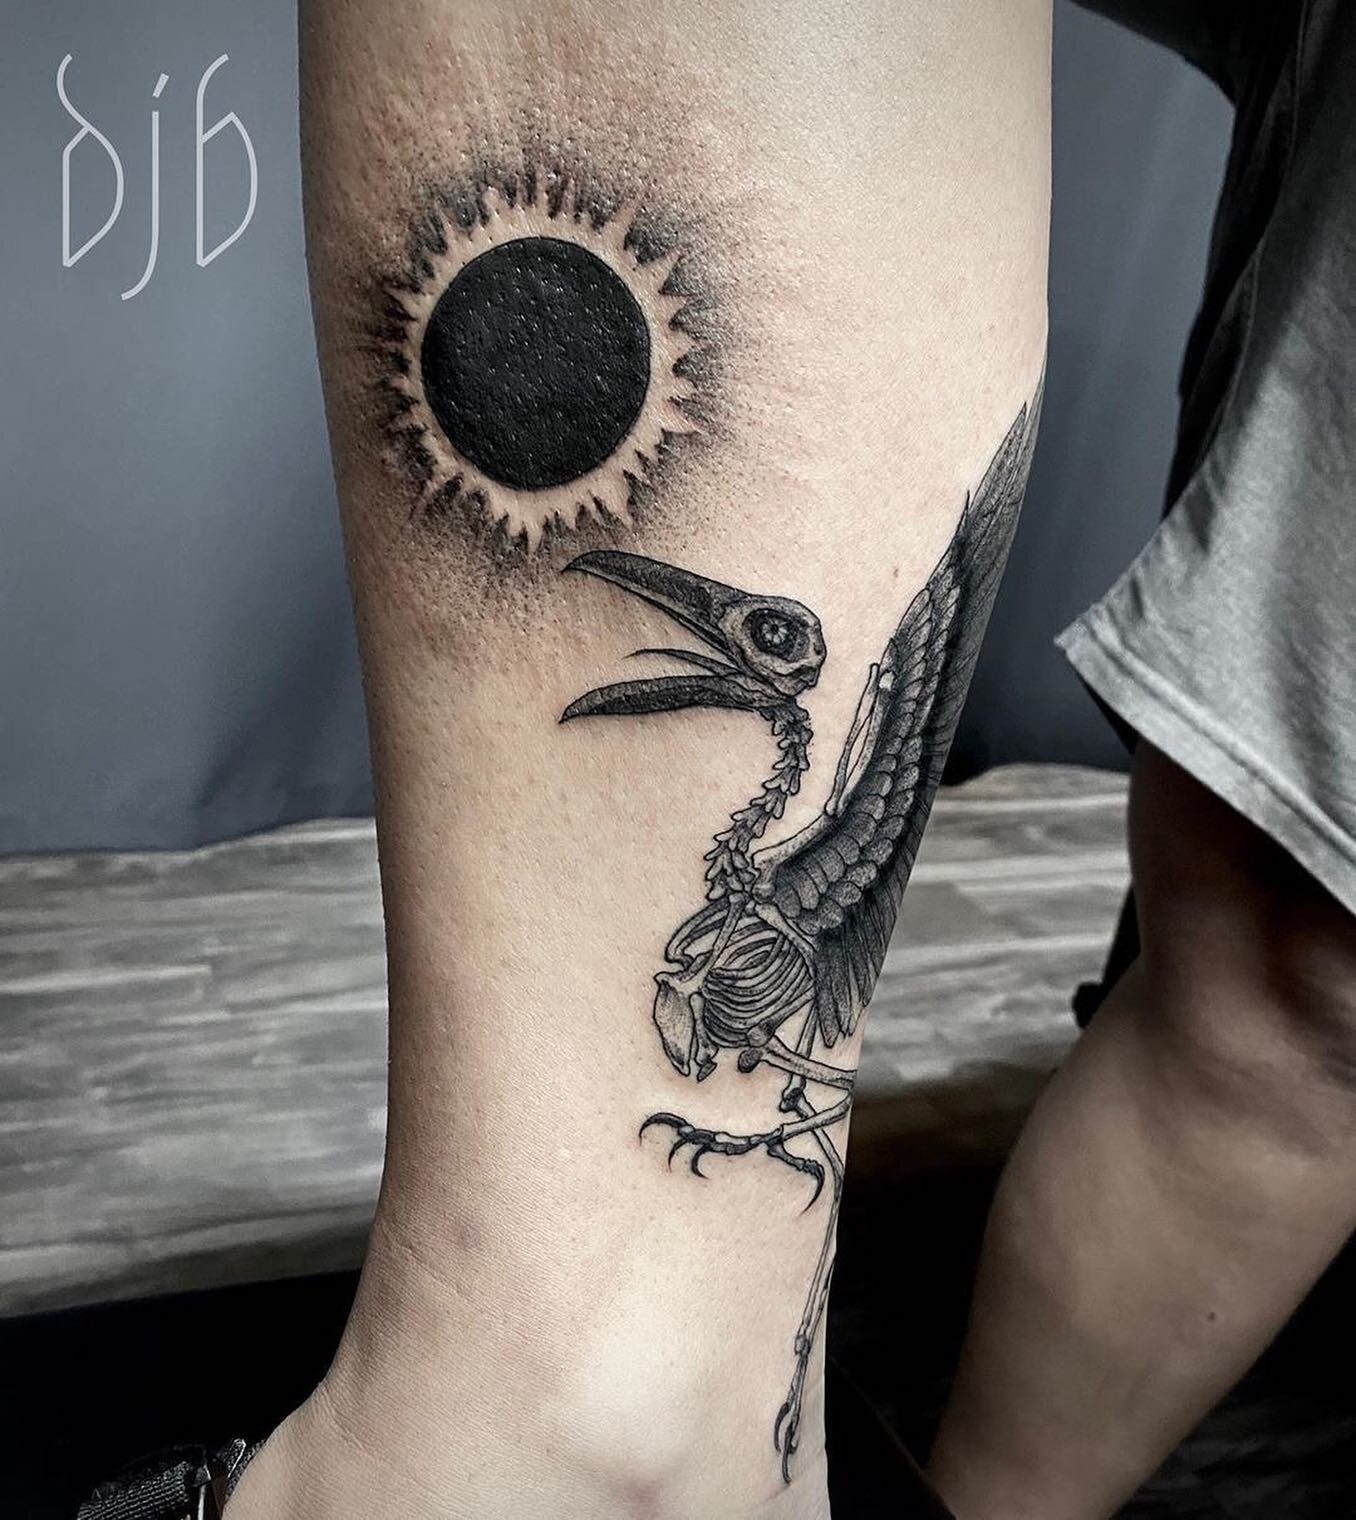 Check out this raven and sun by @darrenjbabbitt!